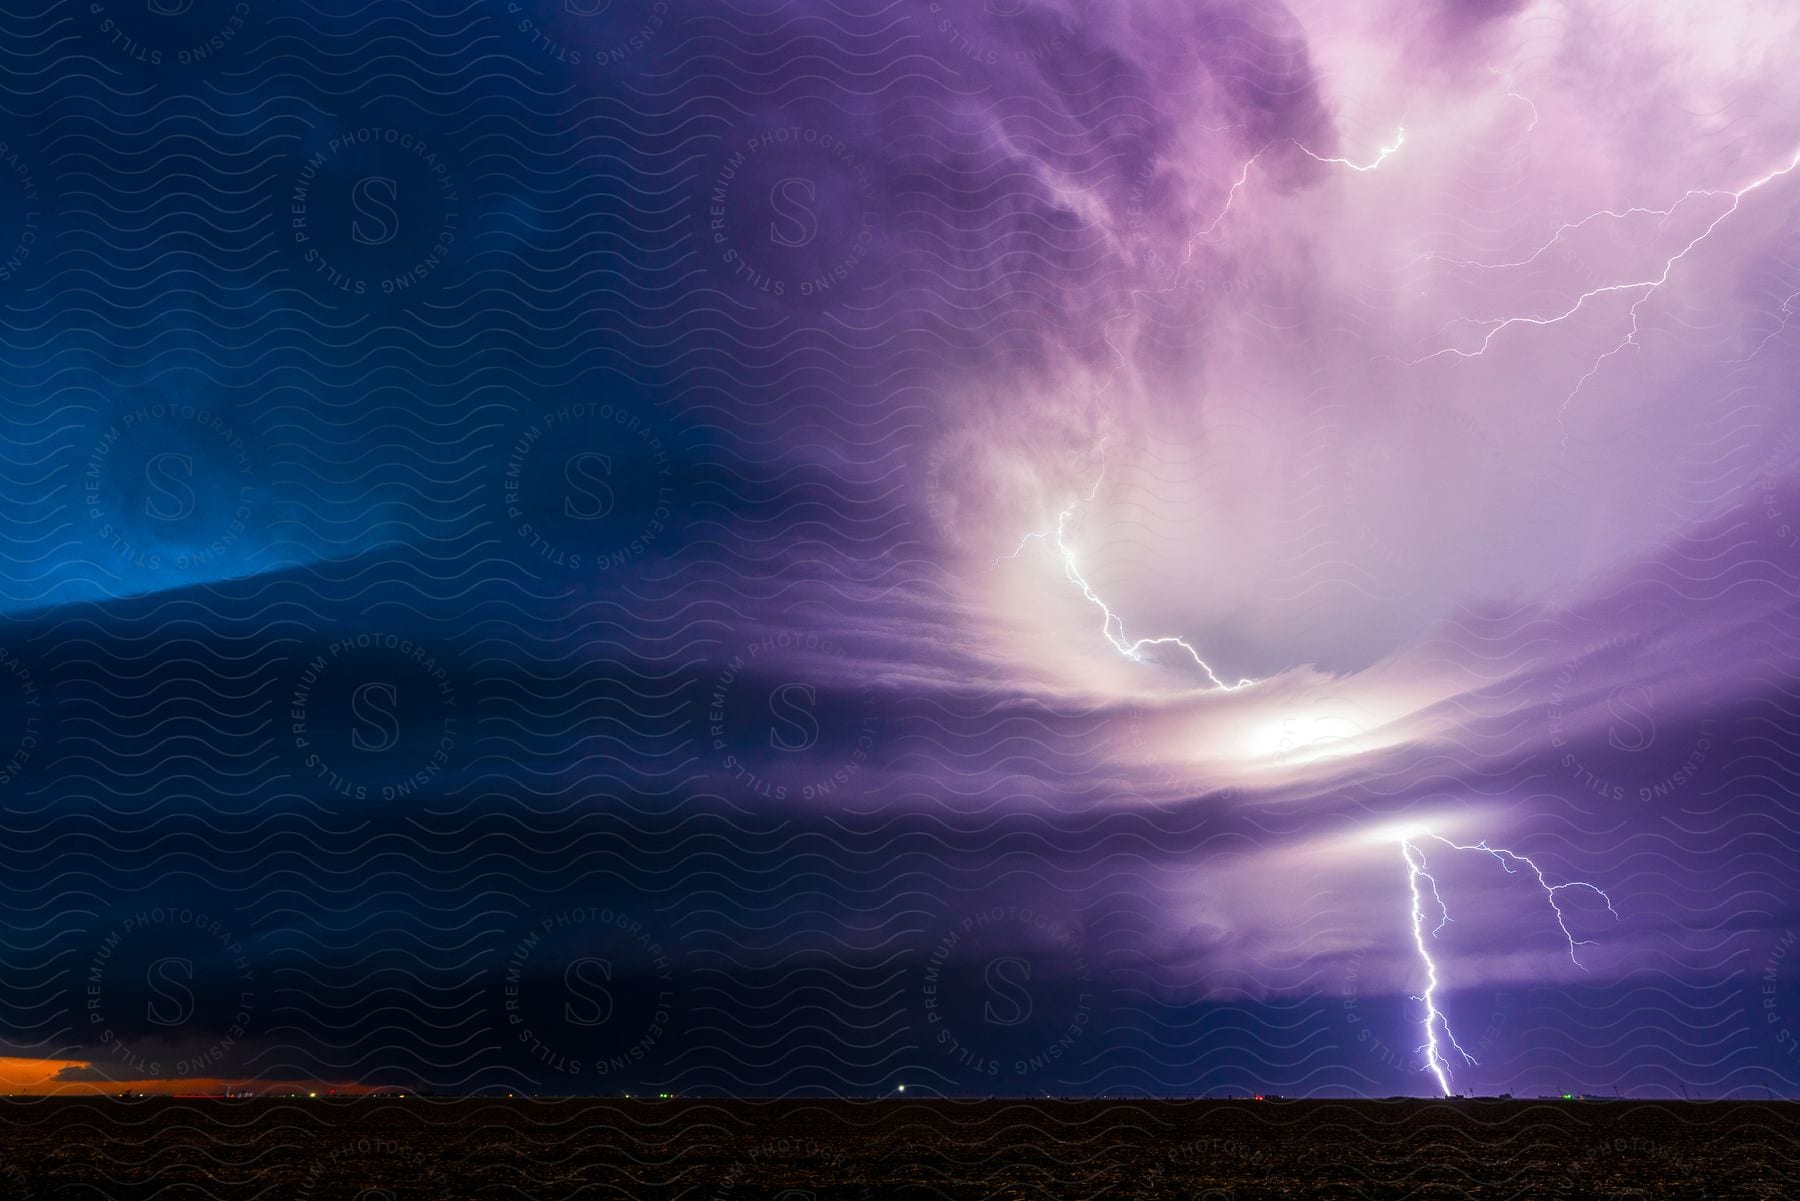 A lightning bolt strikes the ground illuminating the sky next to a storm cloud at night